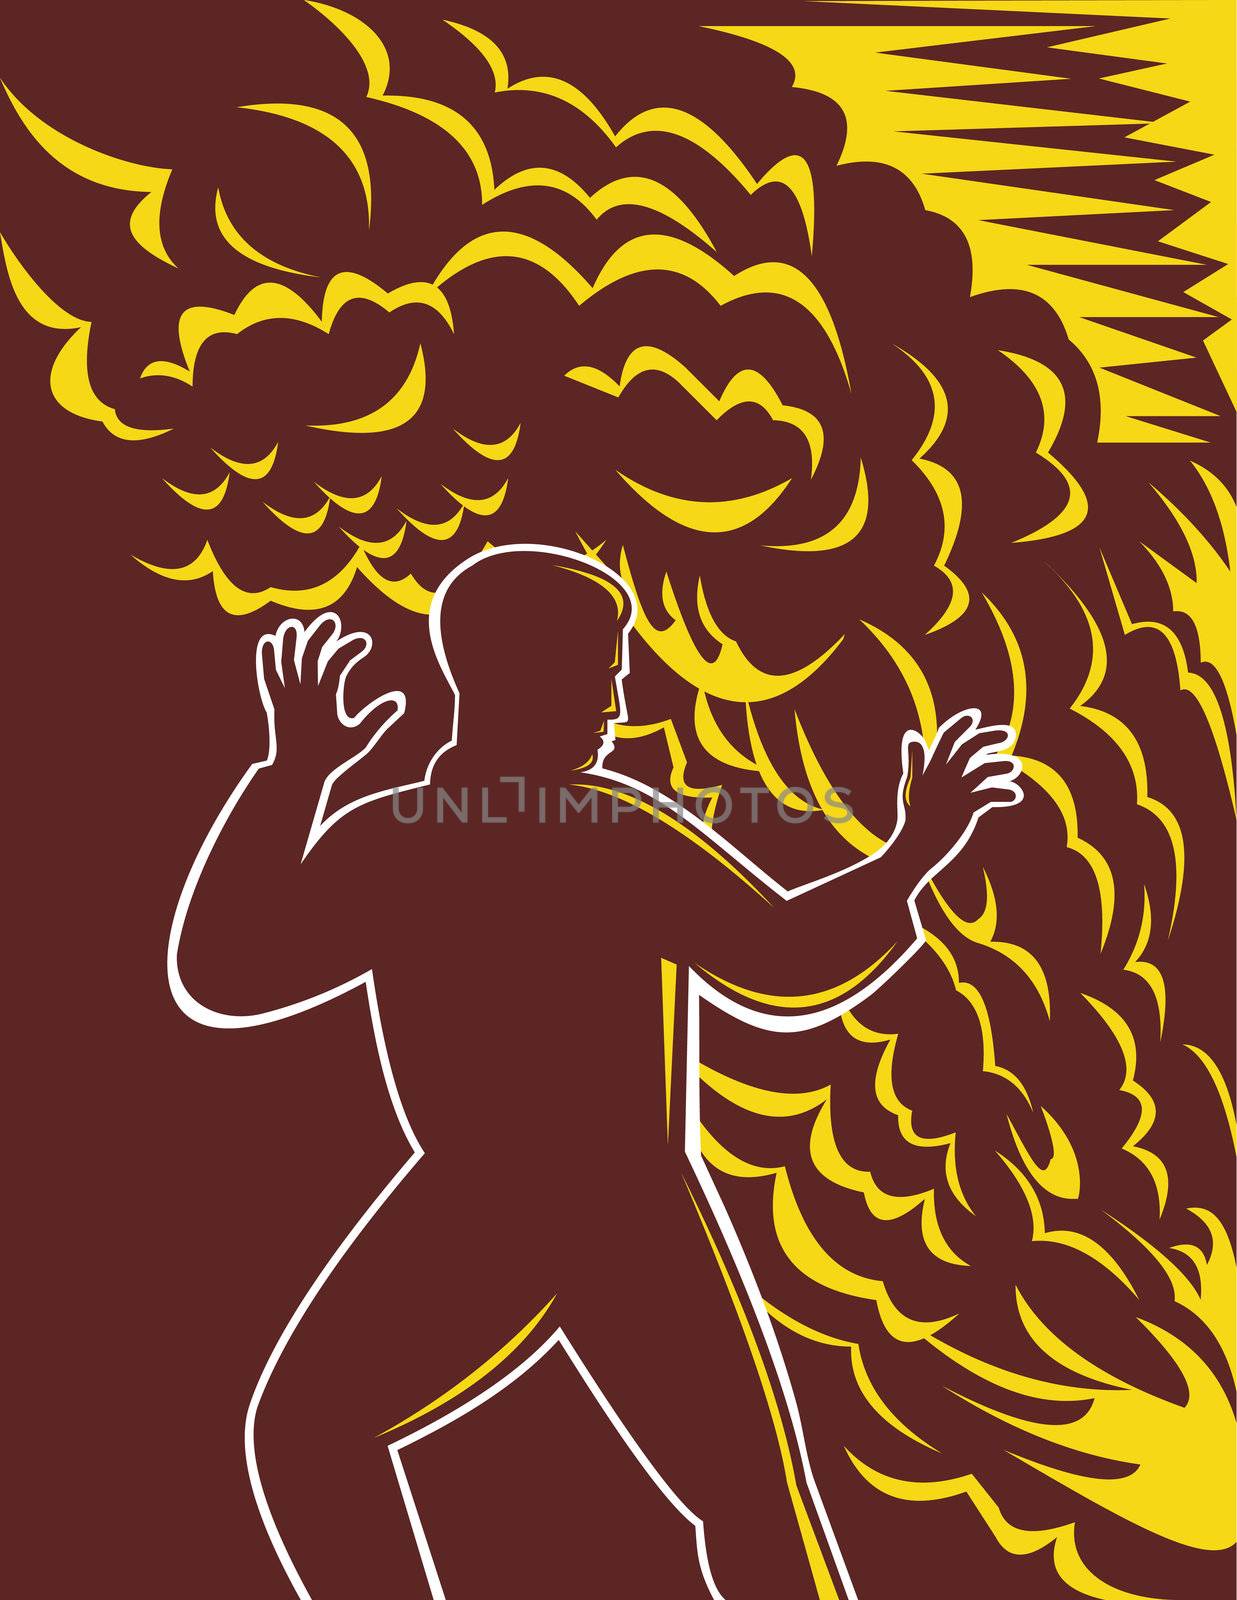 illustratino of a Man scared in front of burning fire and smoke